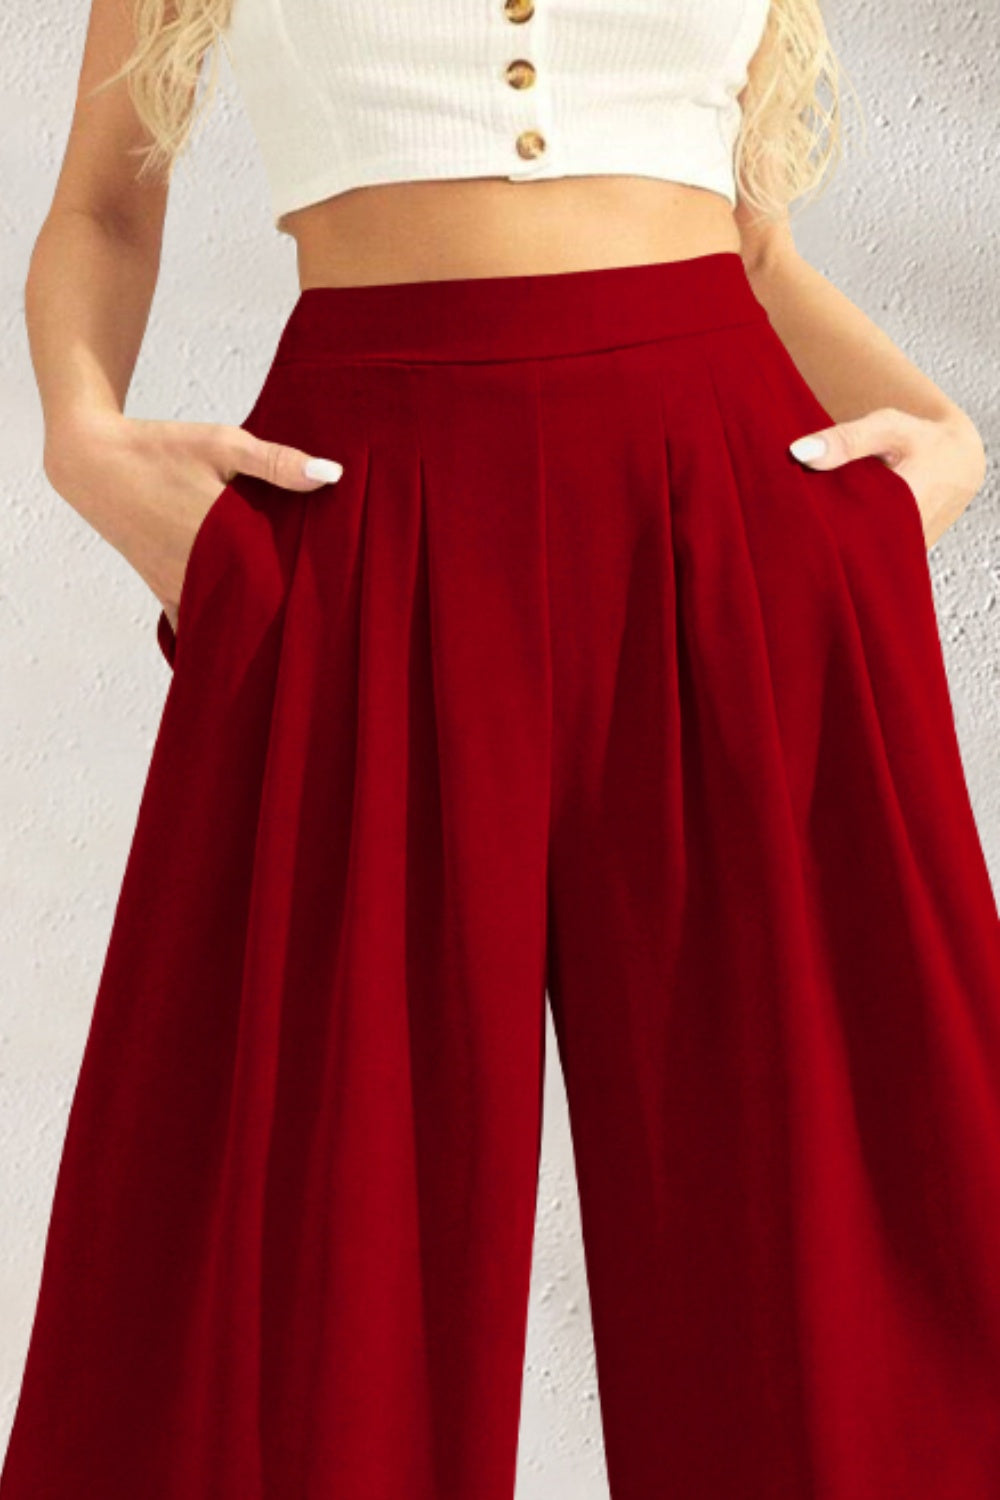 High Waist Wide Leg Pants in Multiple Colors Southern Soul Collectives